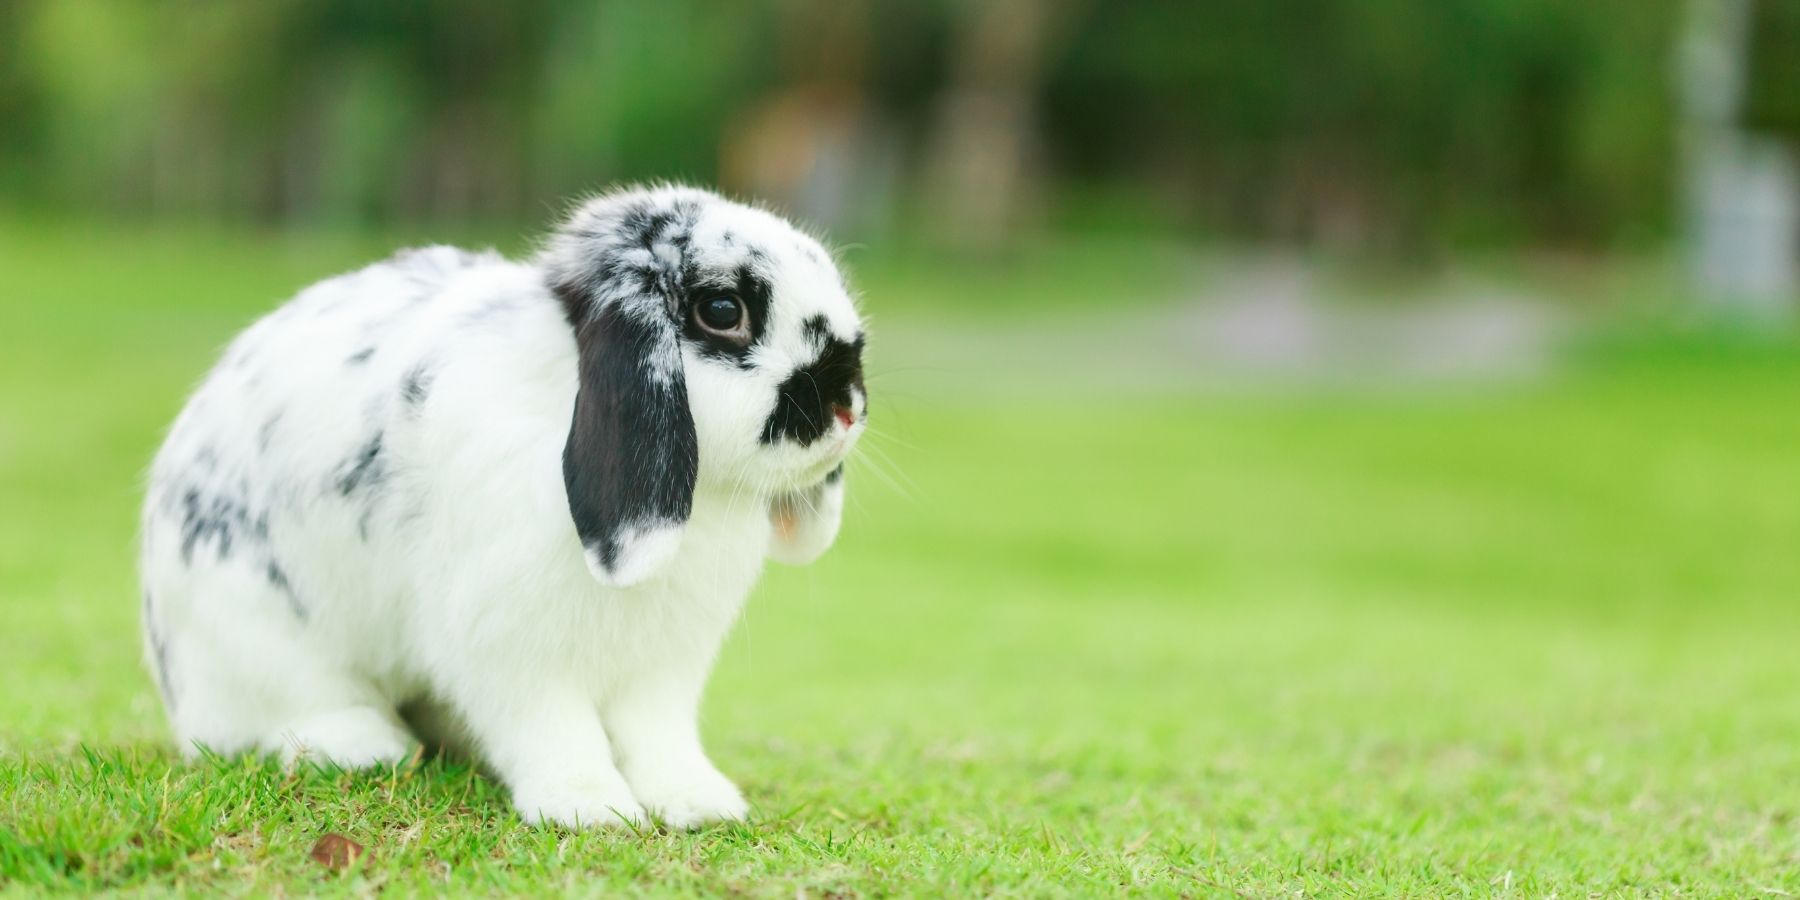 When Is a Rabbit Fully Grown? Growth Stages of Your Pet Bunny